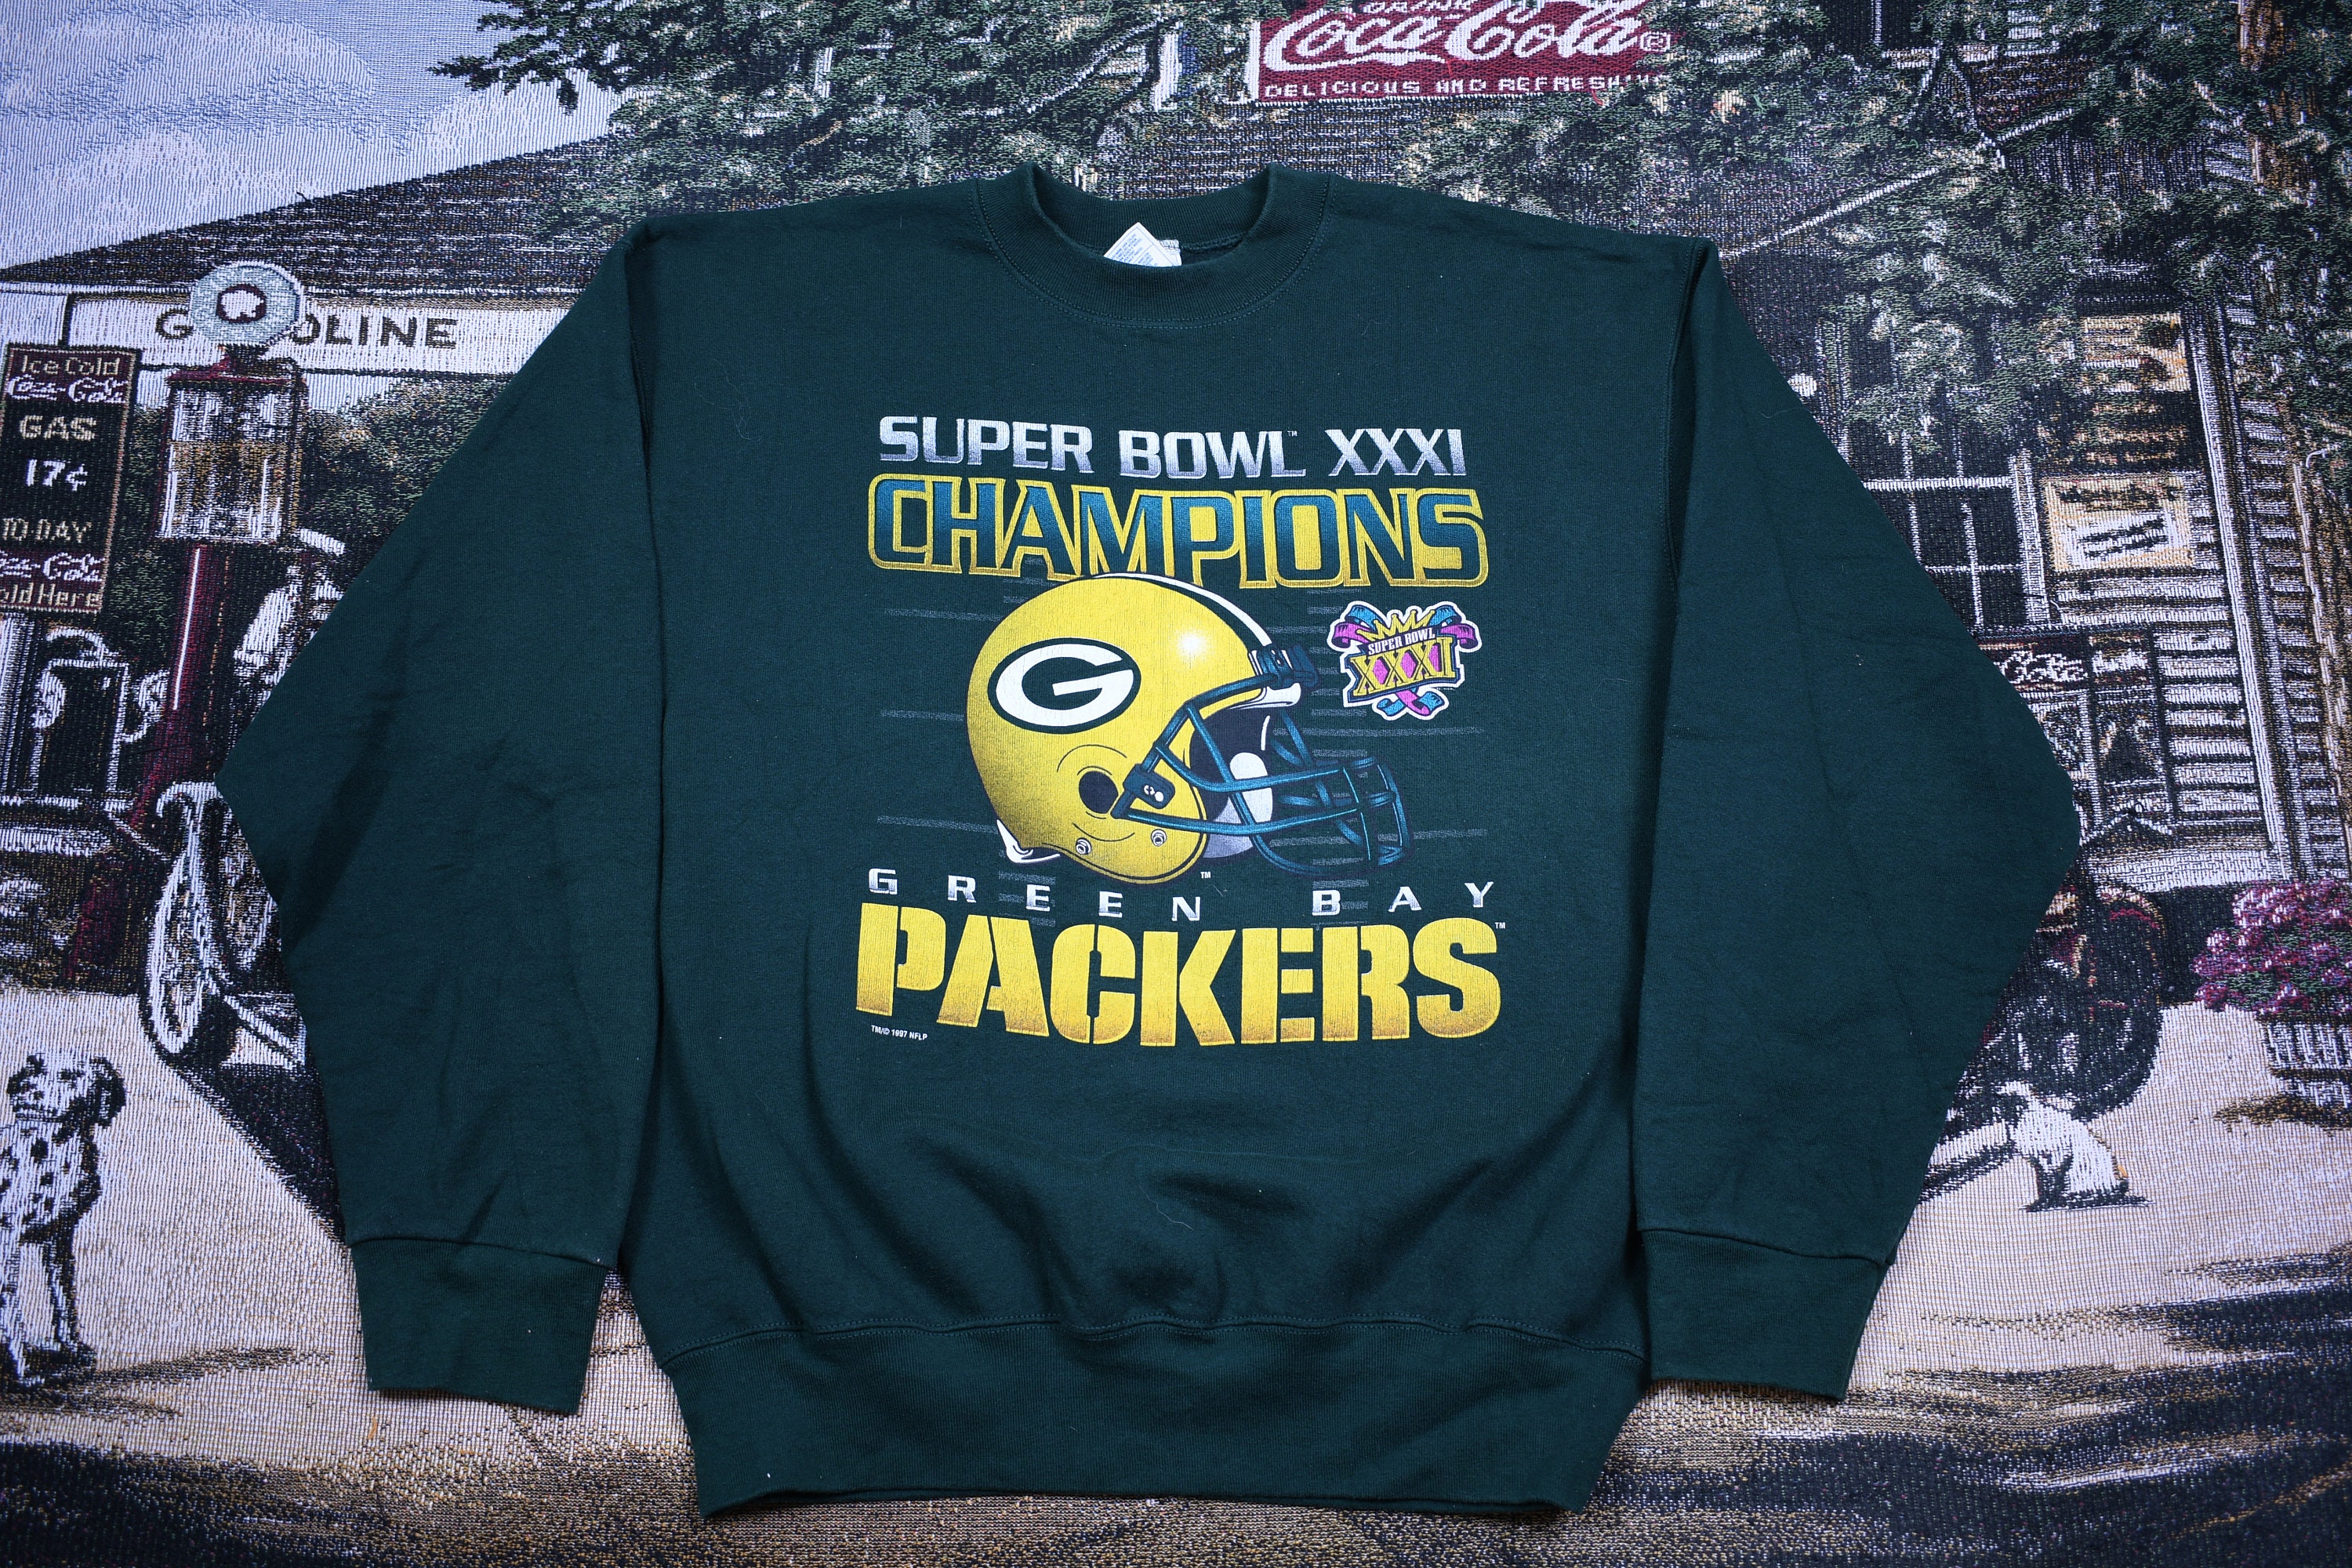 Green Bay Packers / 90s Crewneck / Vintage Super Bowl Sweater | Etsy